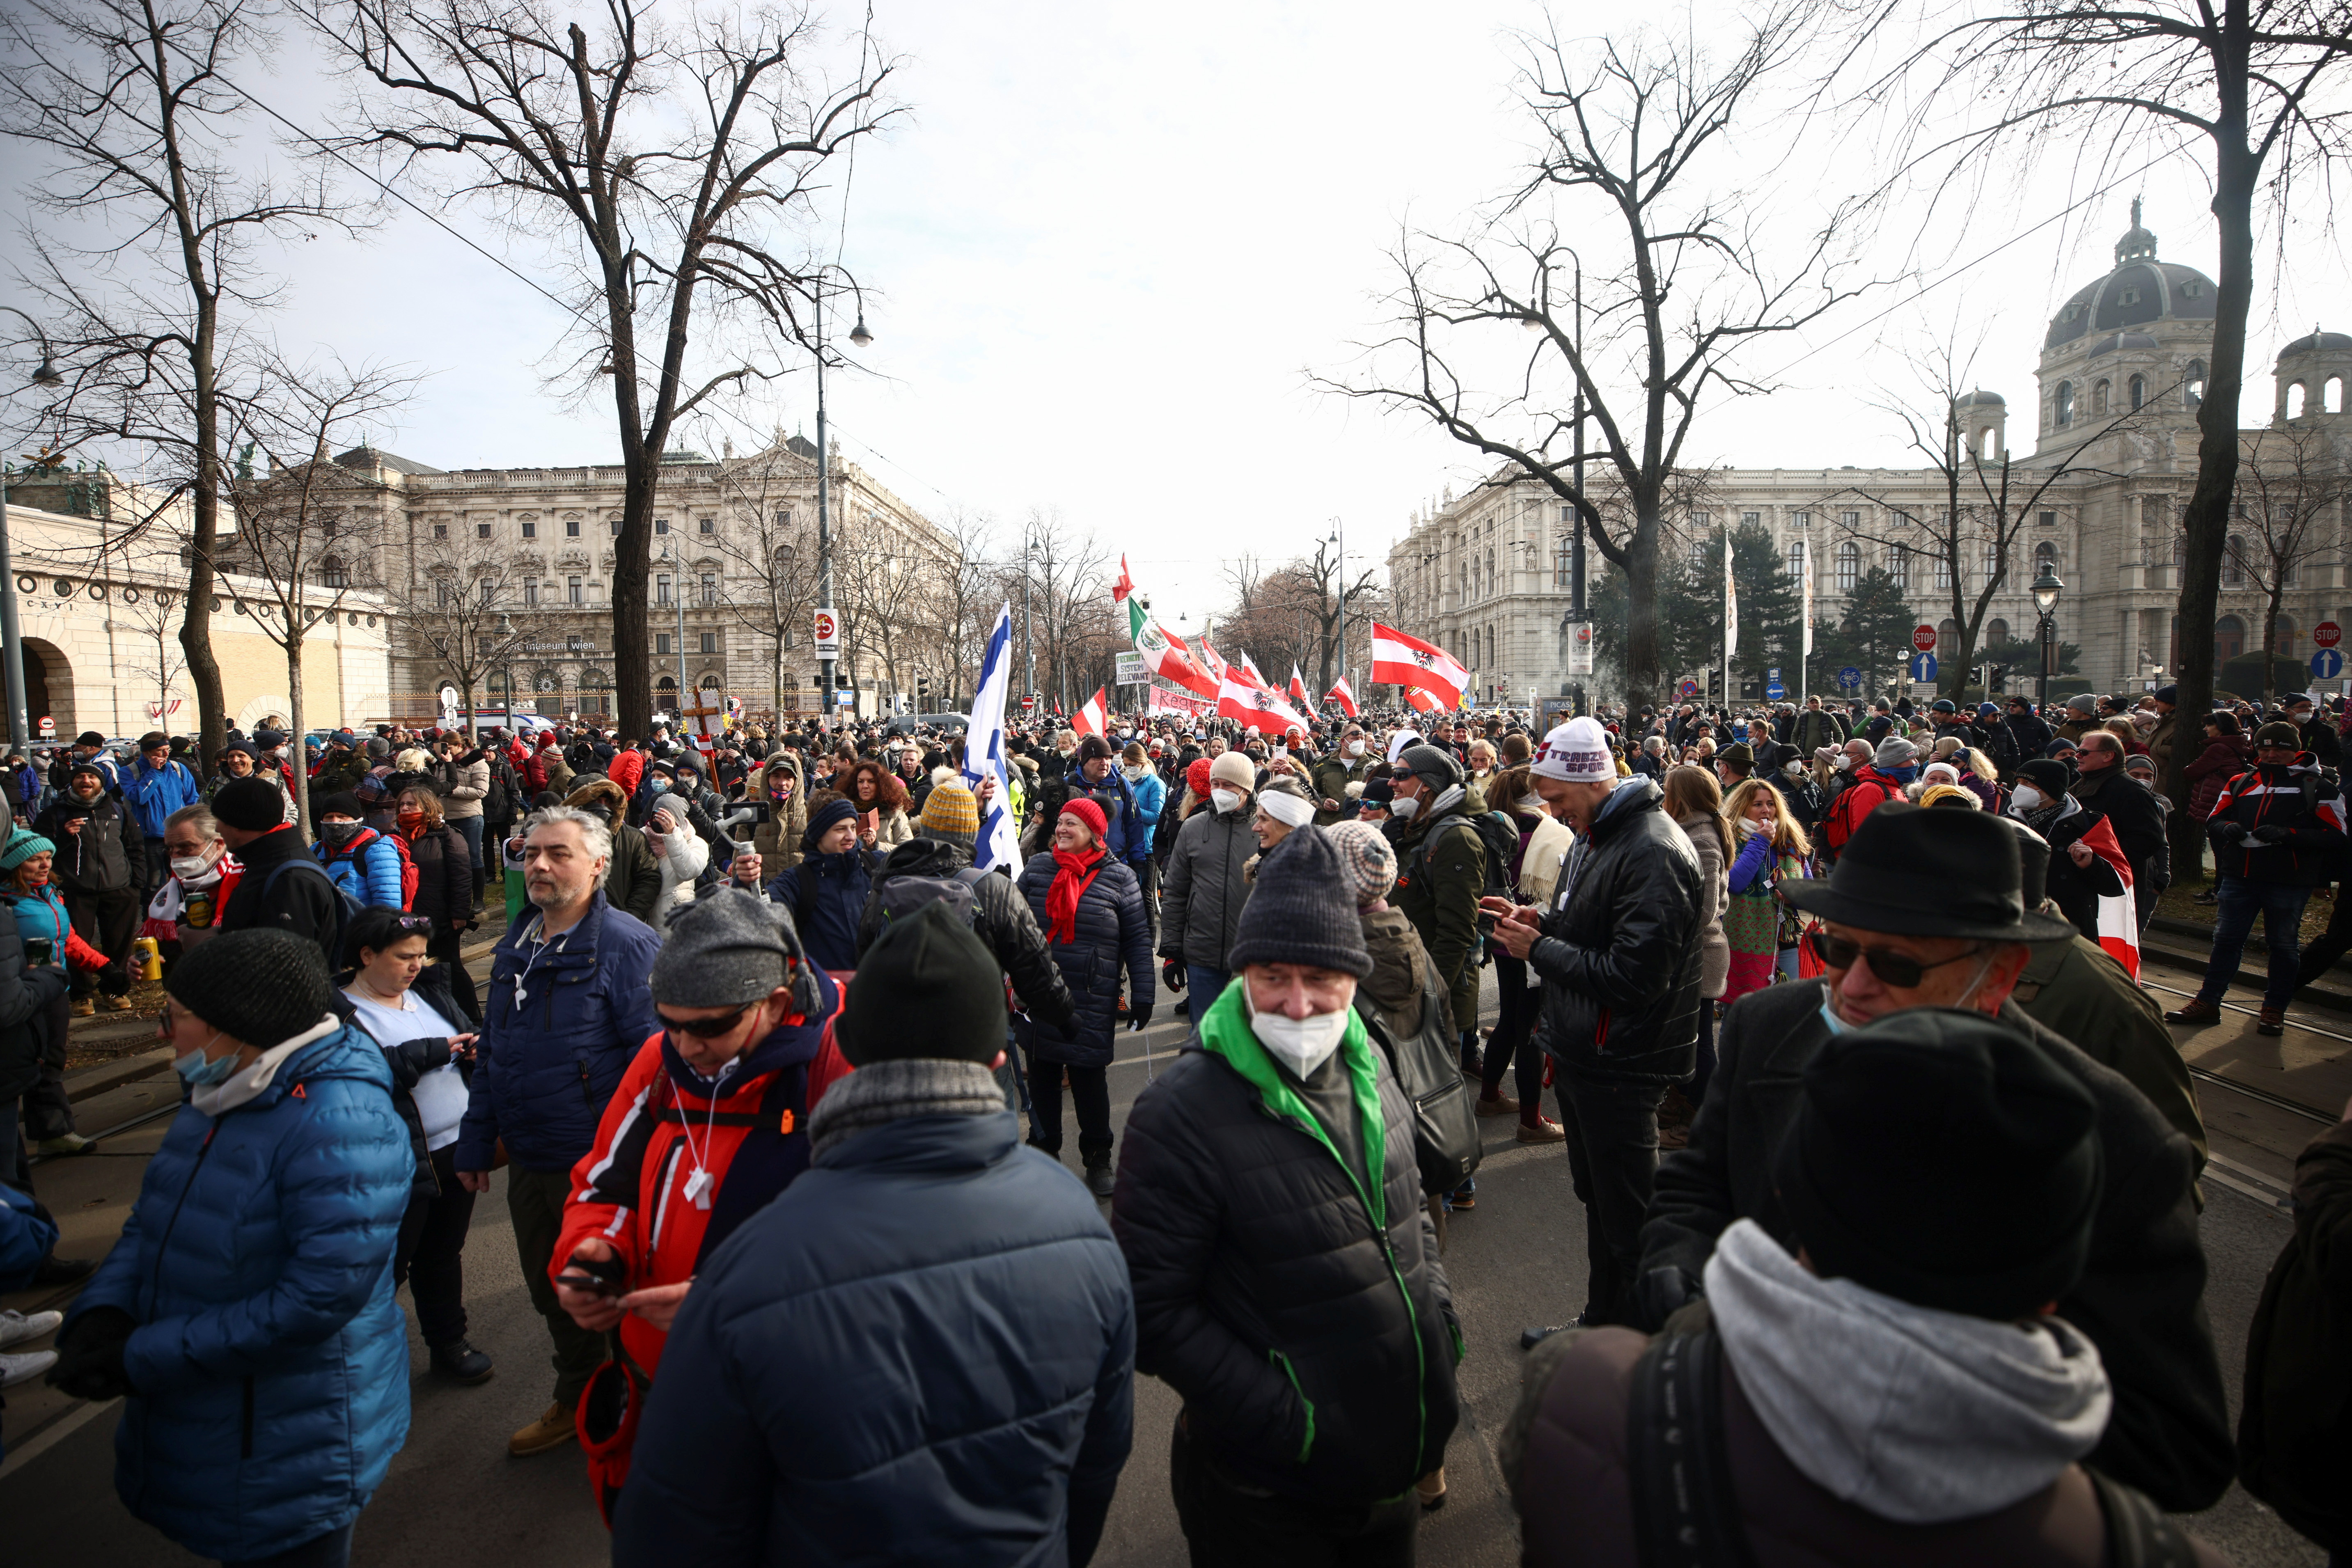 Demonstration against COVID-19 measures in Vienna